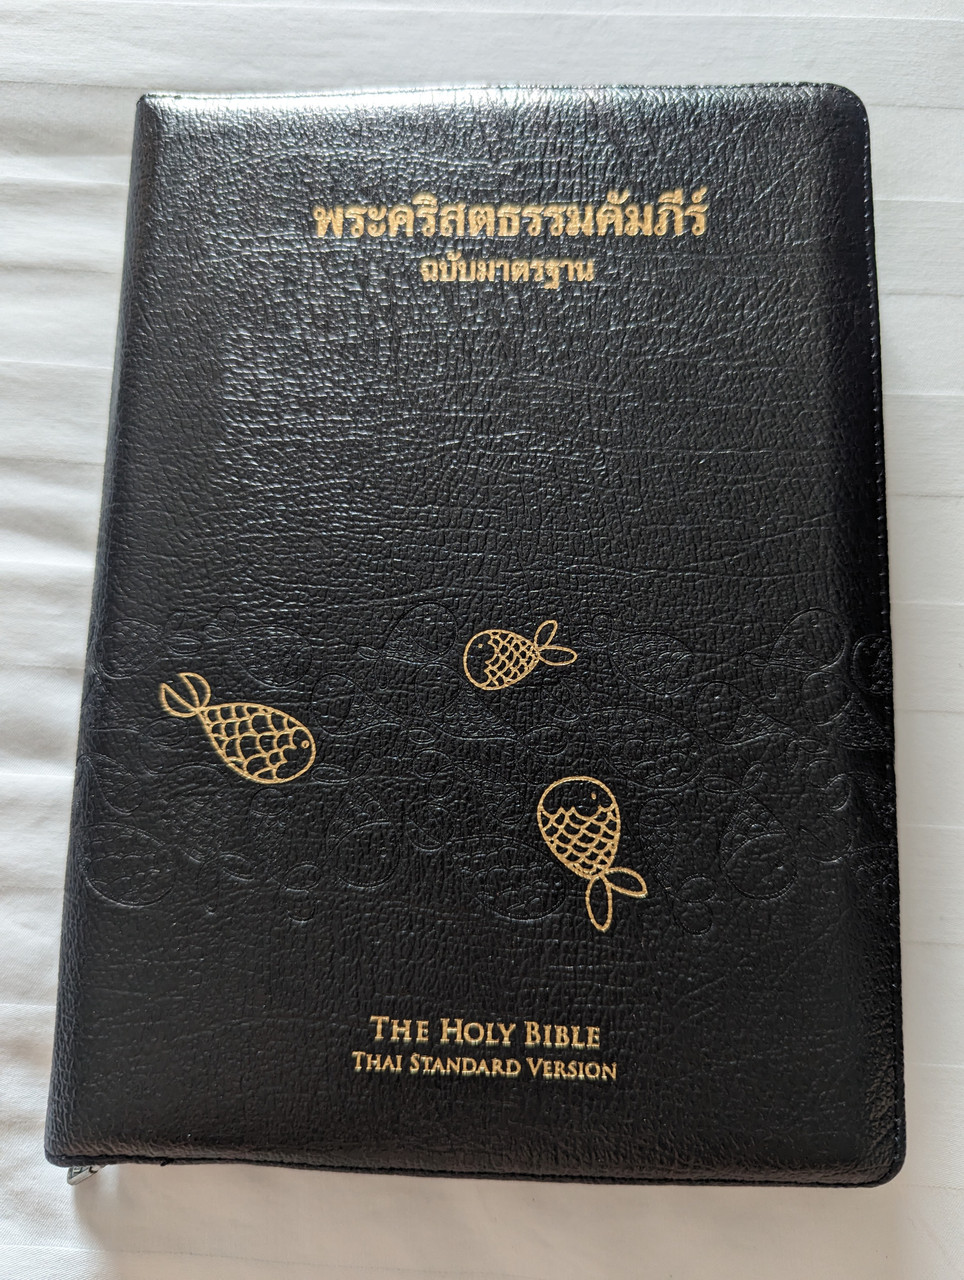 https://cdn10.bigcommerce.com/s-62bdpkt7pb/products/7535/images/311938/Thai_Standard_Version_THSV_Holy_Bible_Zippered_Black_Leather_with_Thumb_Index_1__47381.1699822551.1280.1280.jpg?c=2